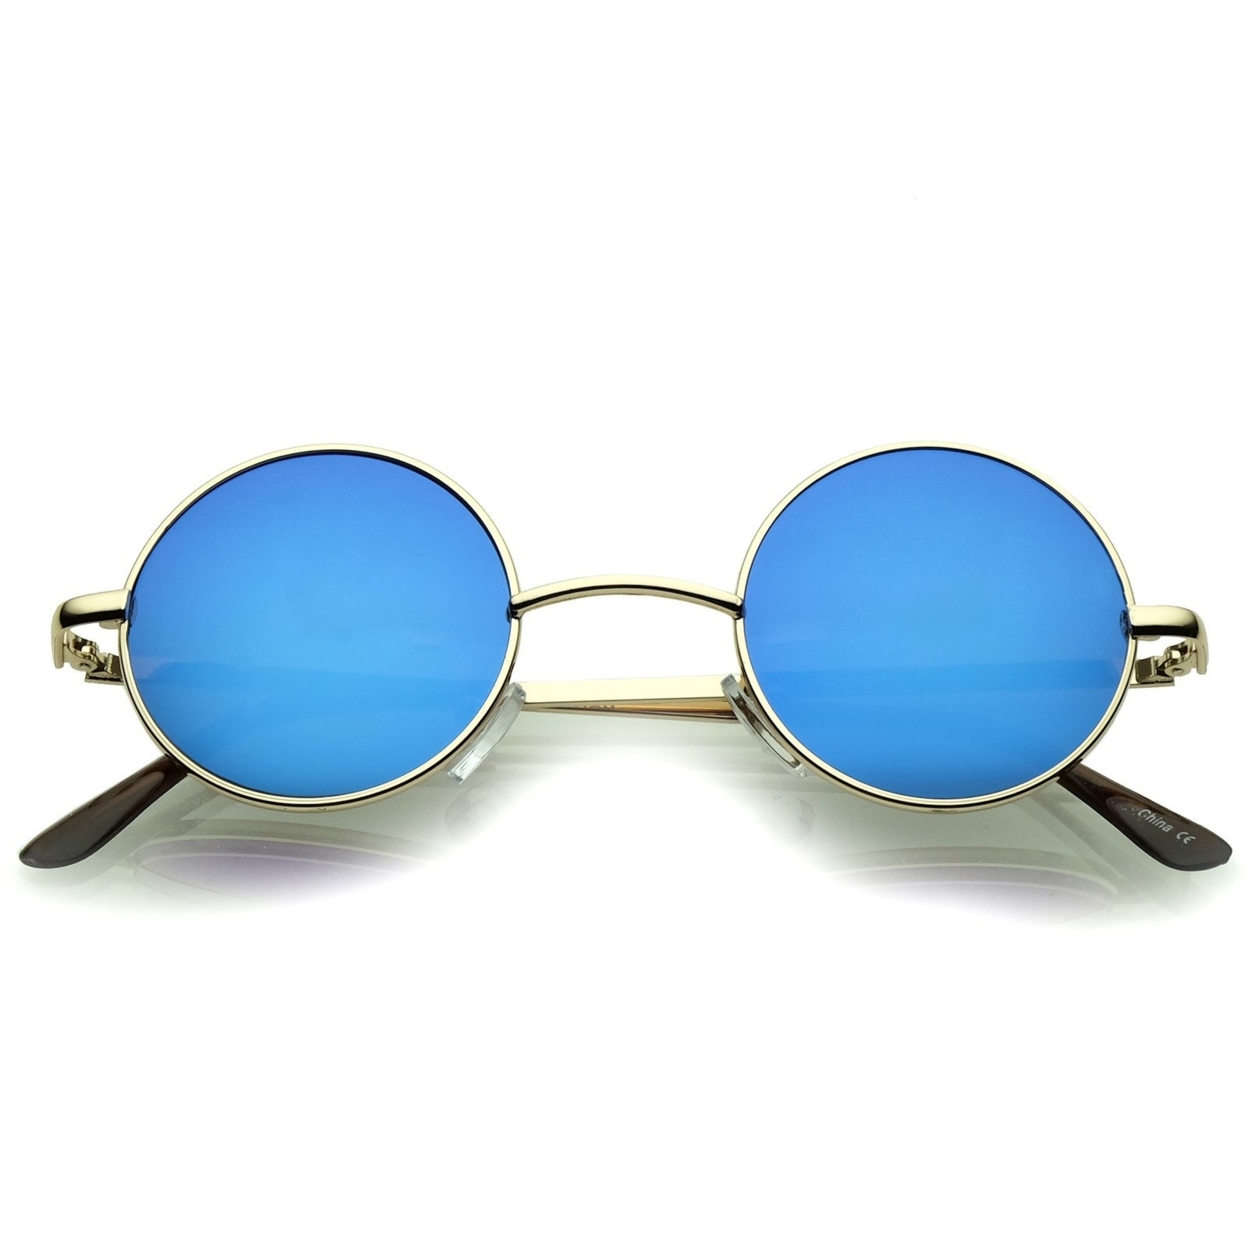 Small Retro Lennon Inspired Style Colored Mirror Lens Round Metal Sunglasses 41mm - Gold / Blue Mirror